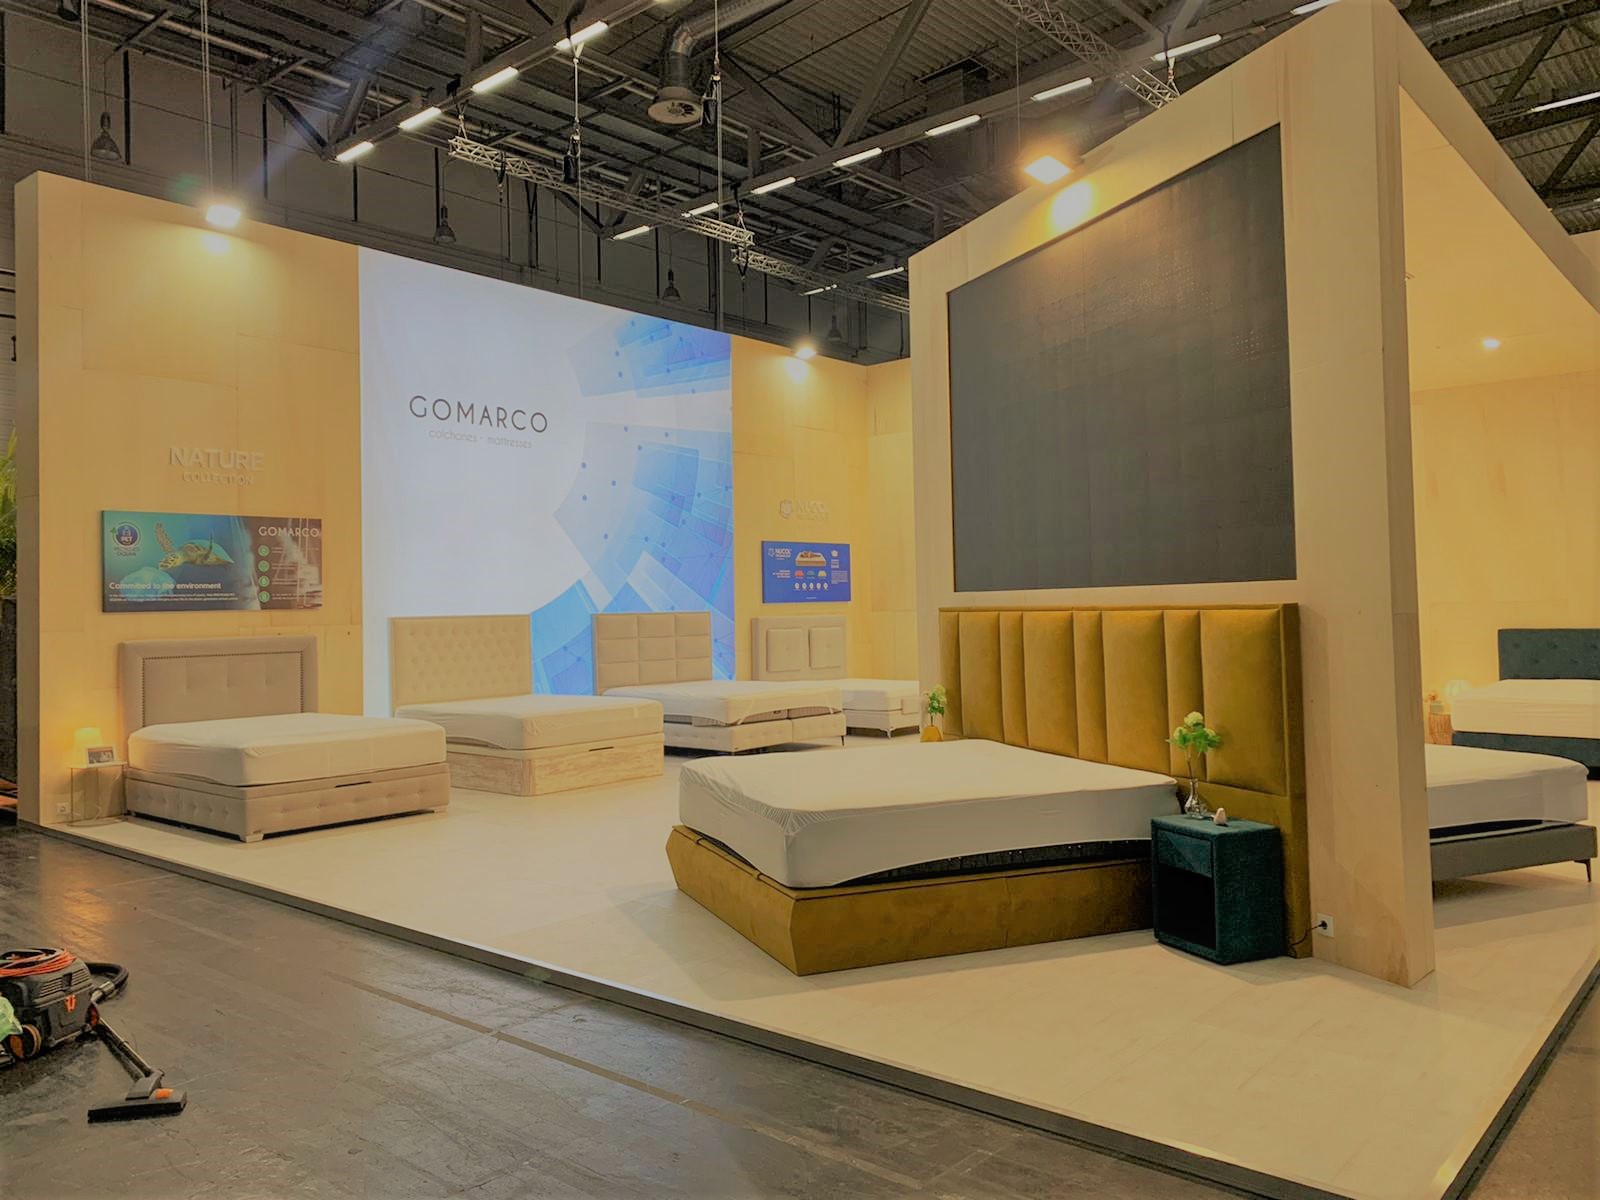 Gomarco Imm Cologne 2020